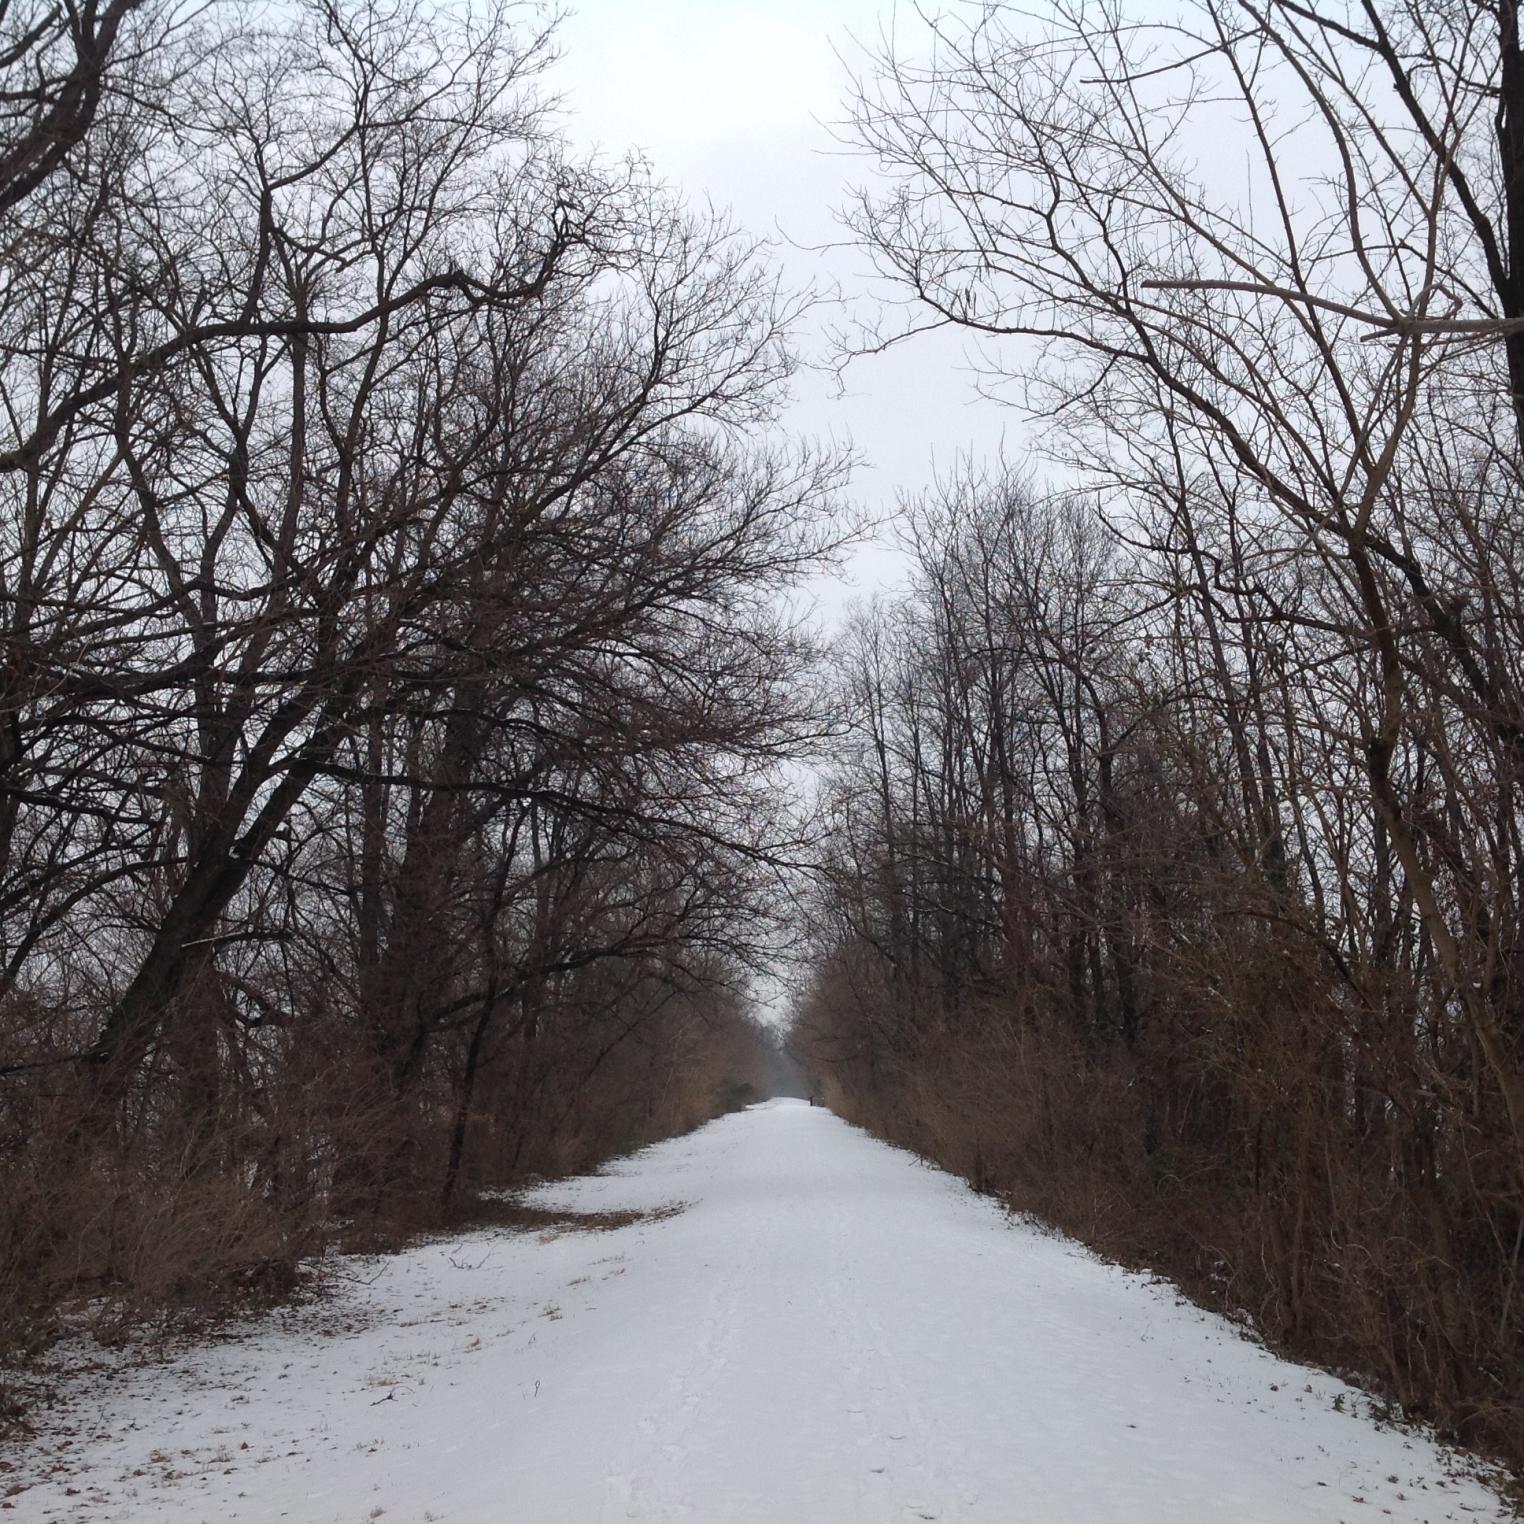 The Cumberland Valley Rail Trail in Winter